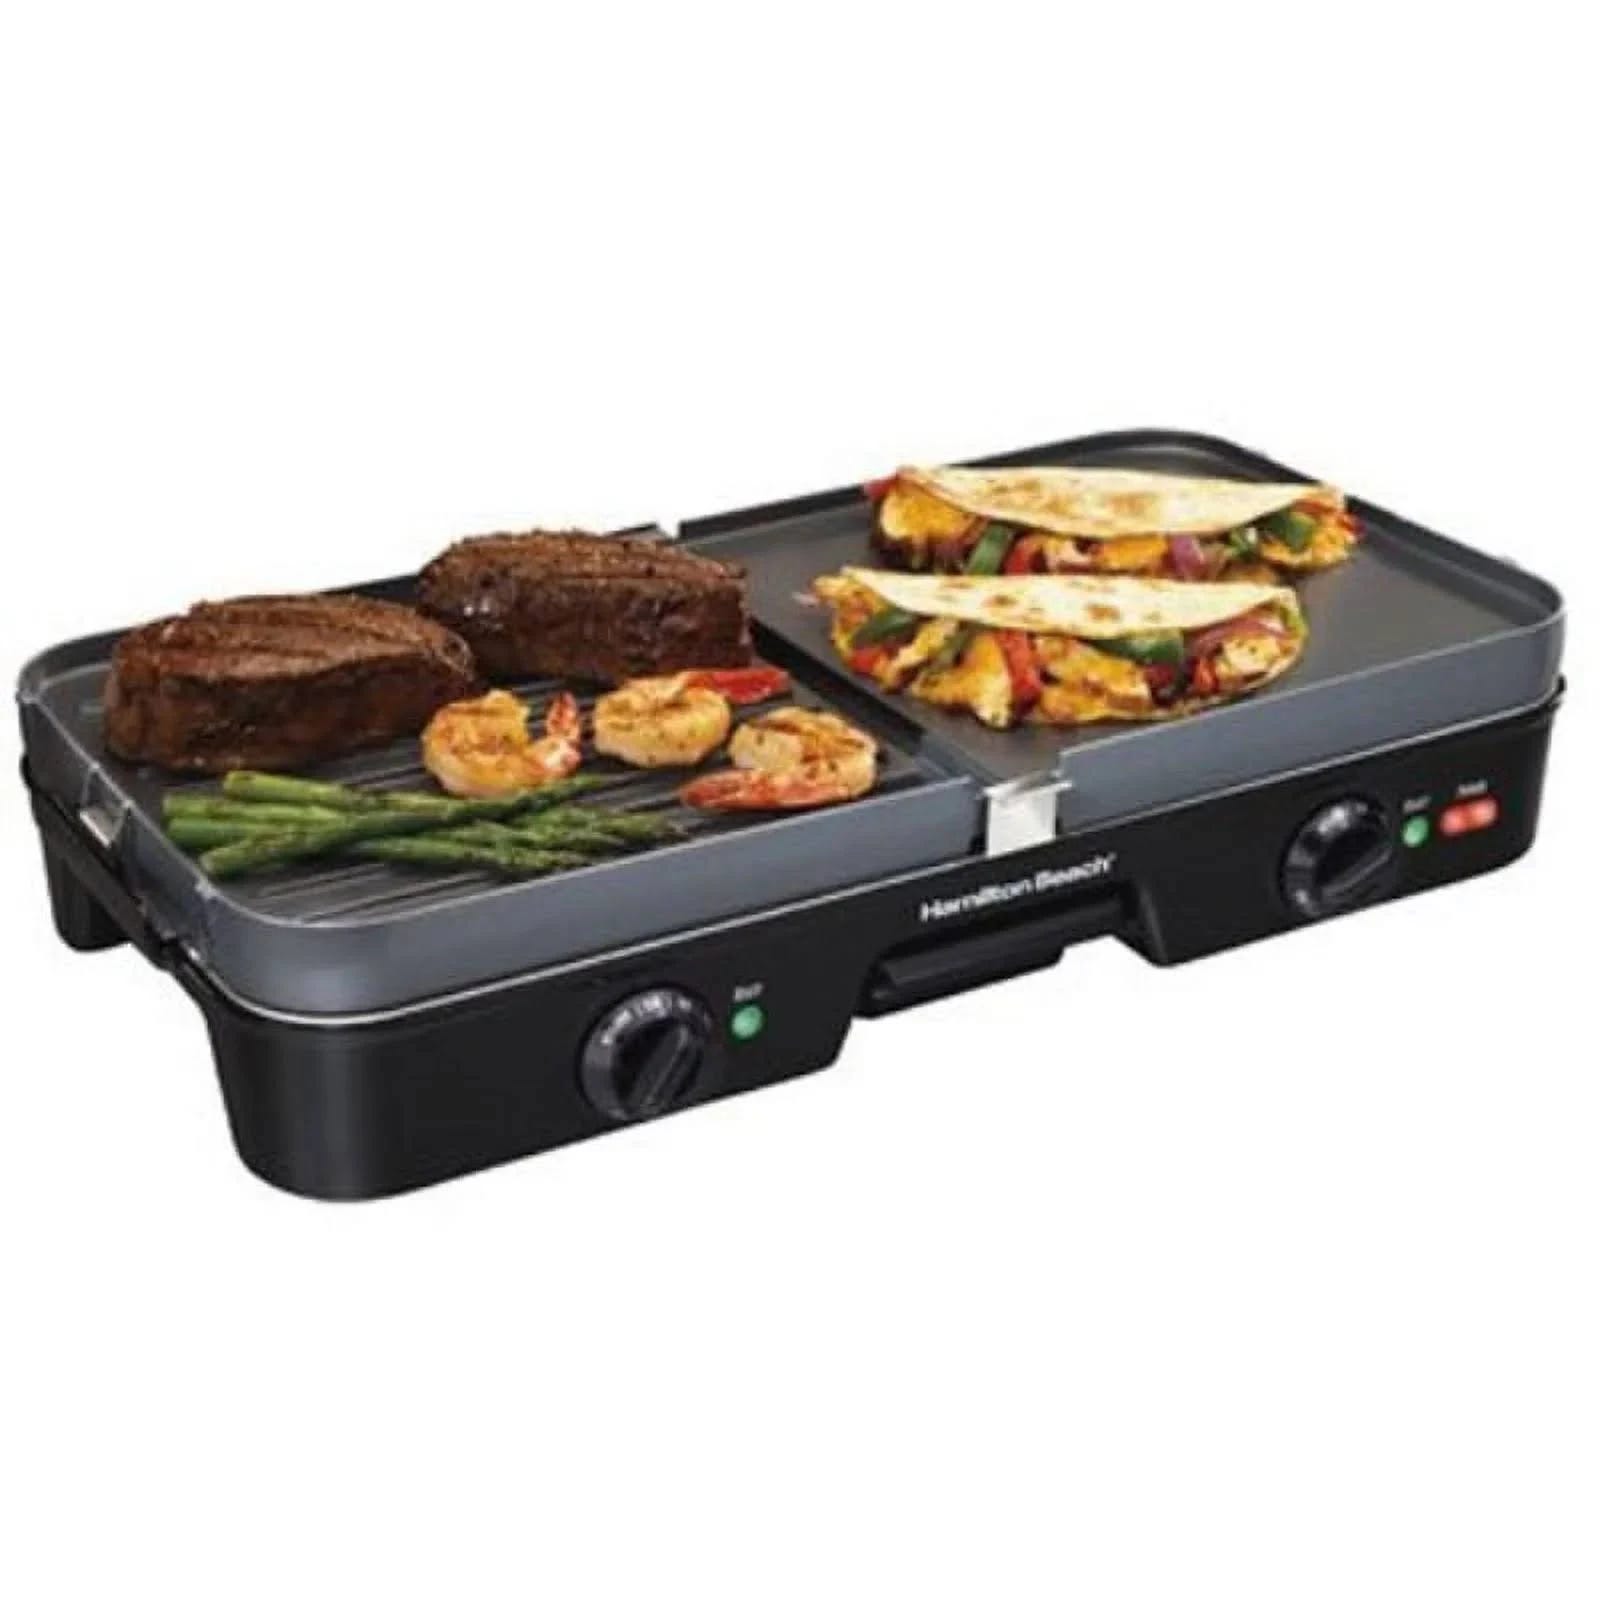 Versatile 3-in-1 Grill Griddle for Gourmet Cooking | Image